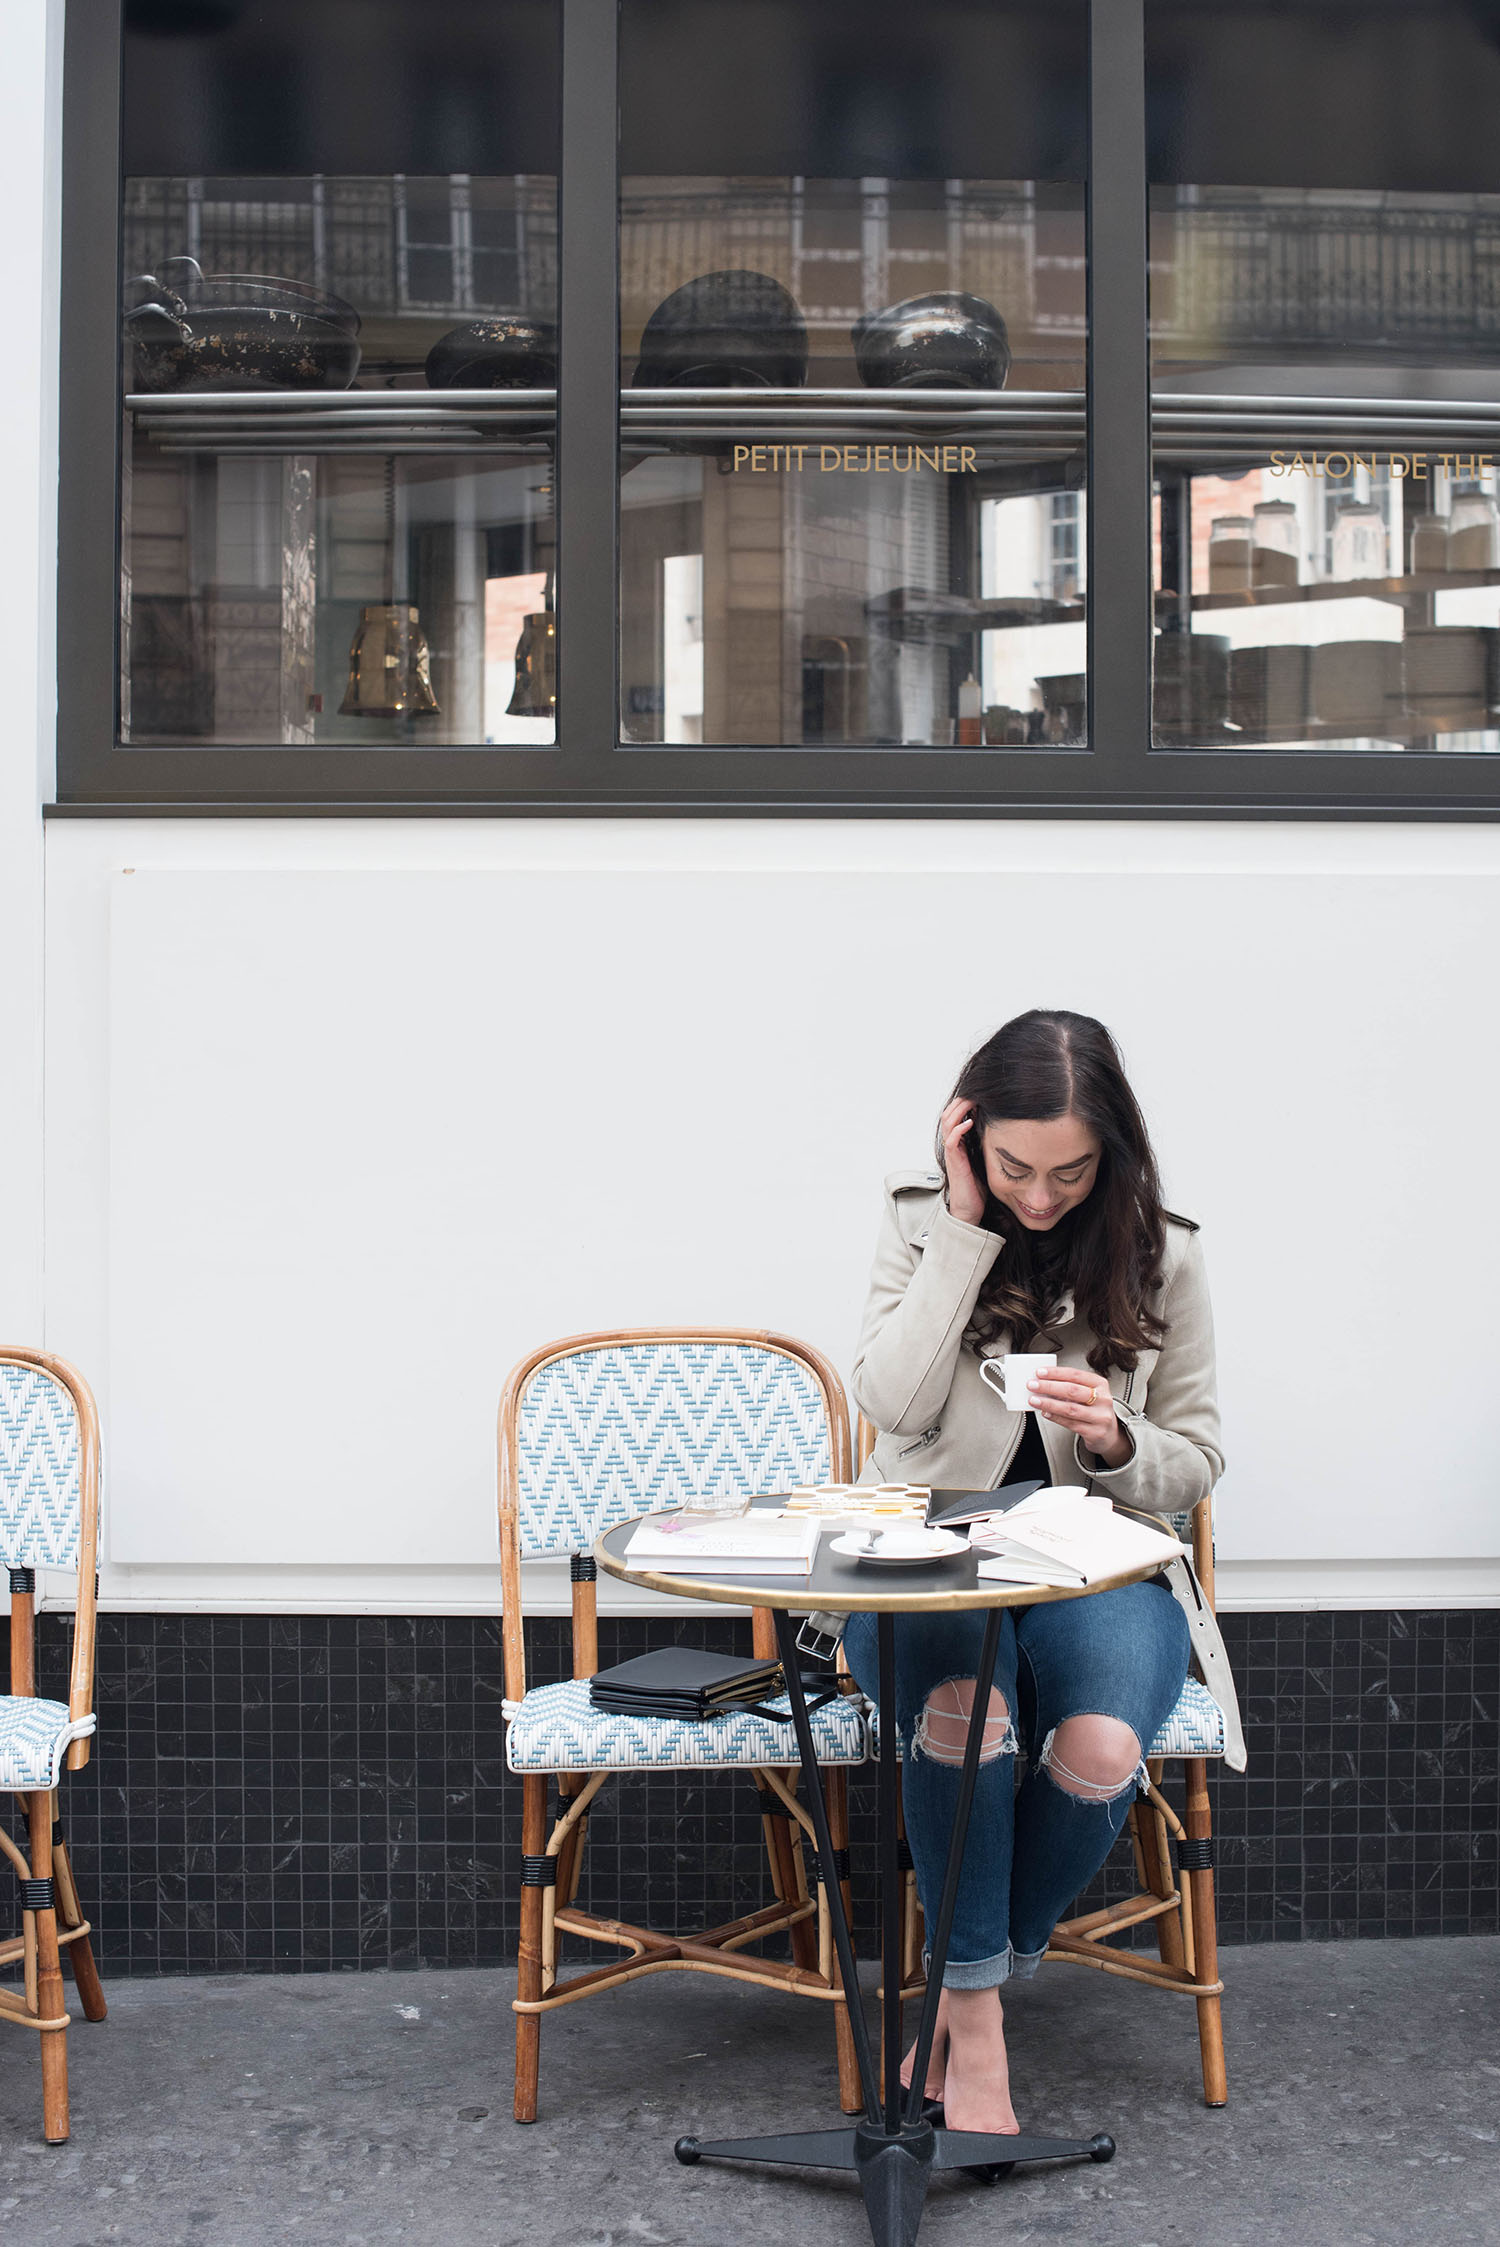 Winnipeg fashion blogger Cee Fardoe of Coco & Vera sits outside Cafe Maison Marie in Paris, drinking coffee during her interview with The Plannerist